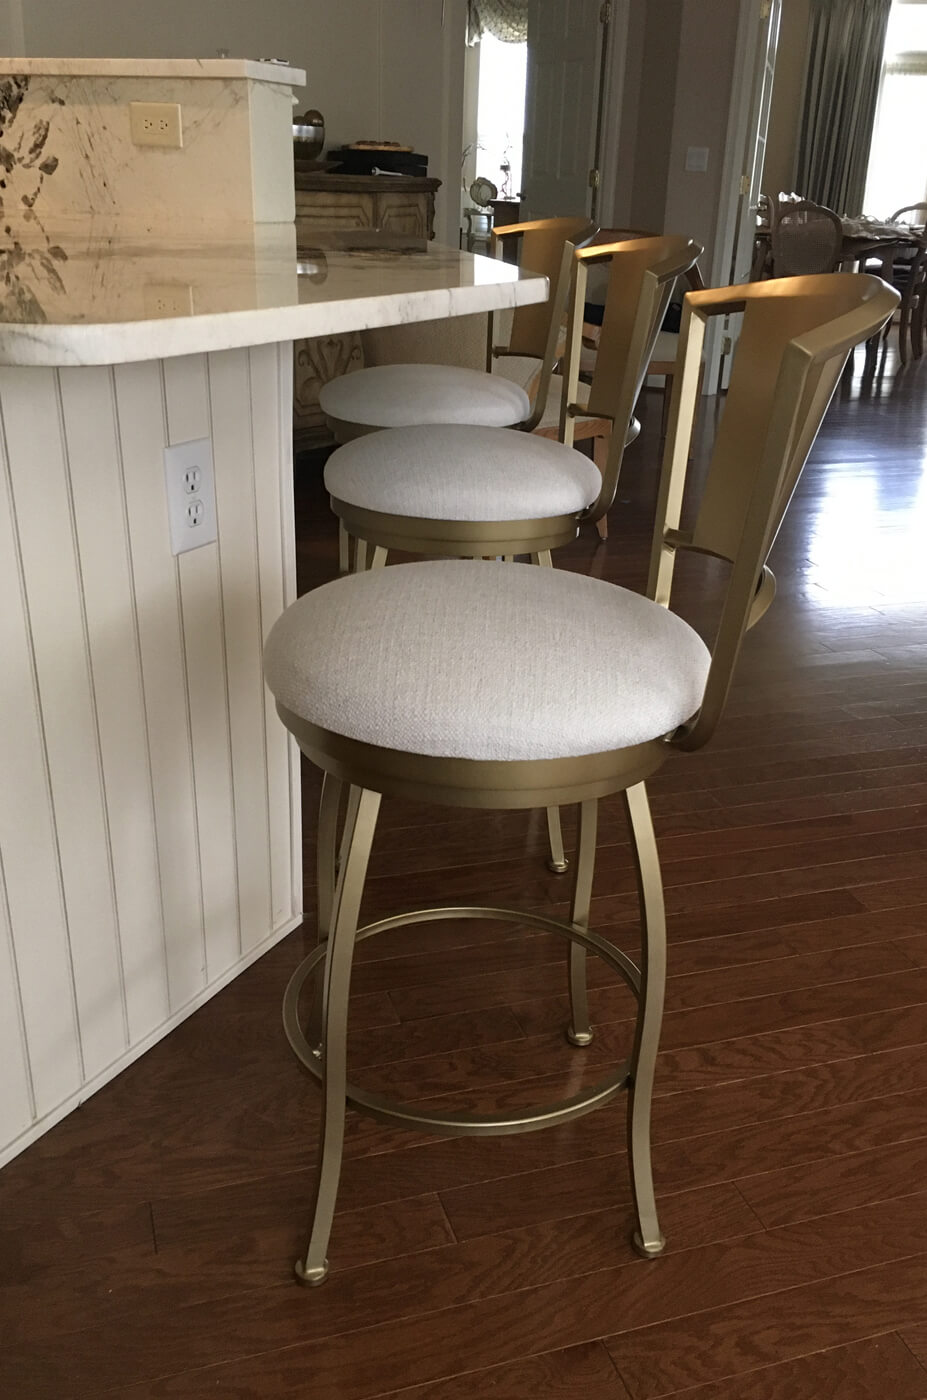 Wesley Allen's Berkeley Modern Gold Swivel Bar Stool with Curved Back in Customer Kitchen